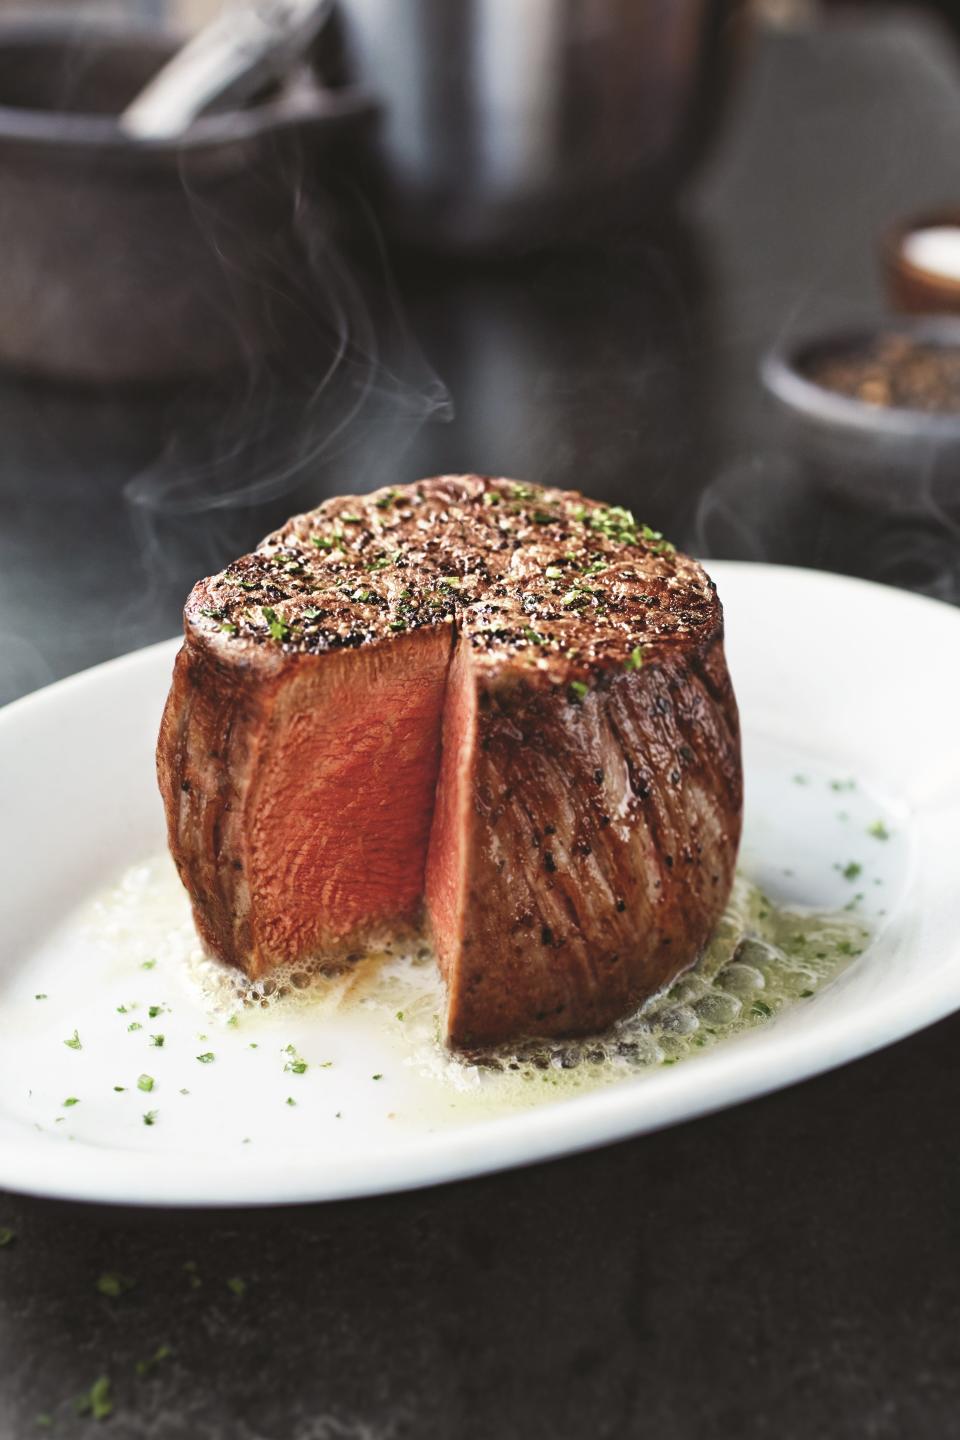 The filet at Ruth 's Chris Steak House.